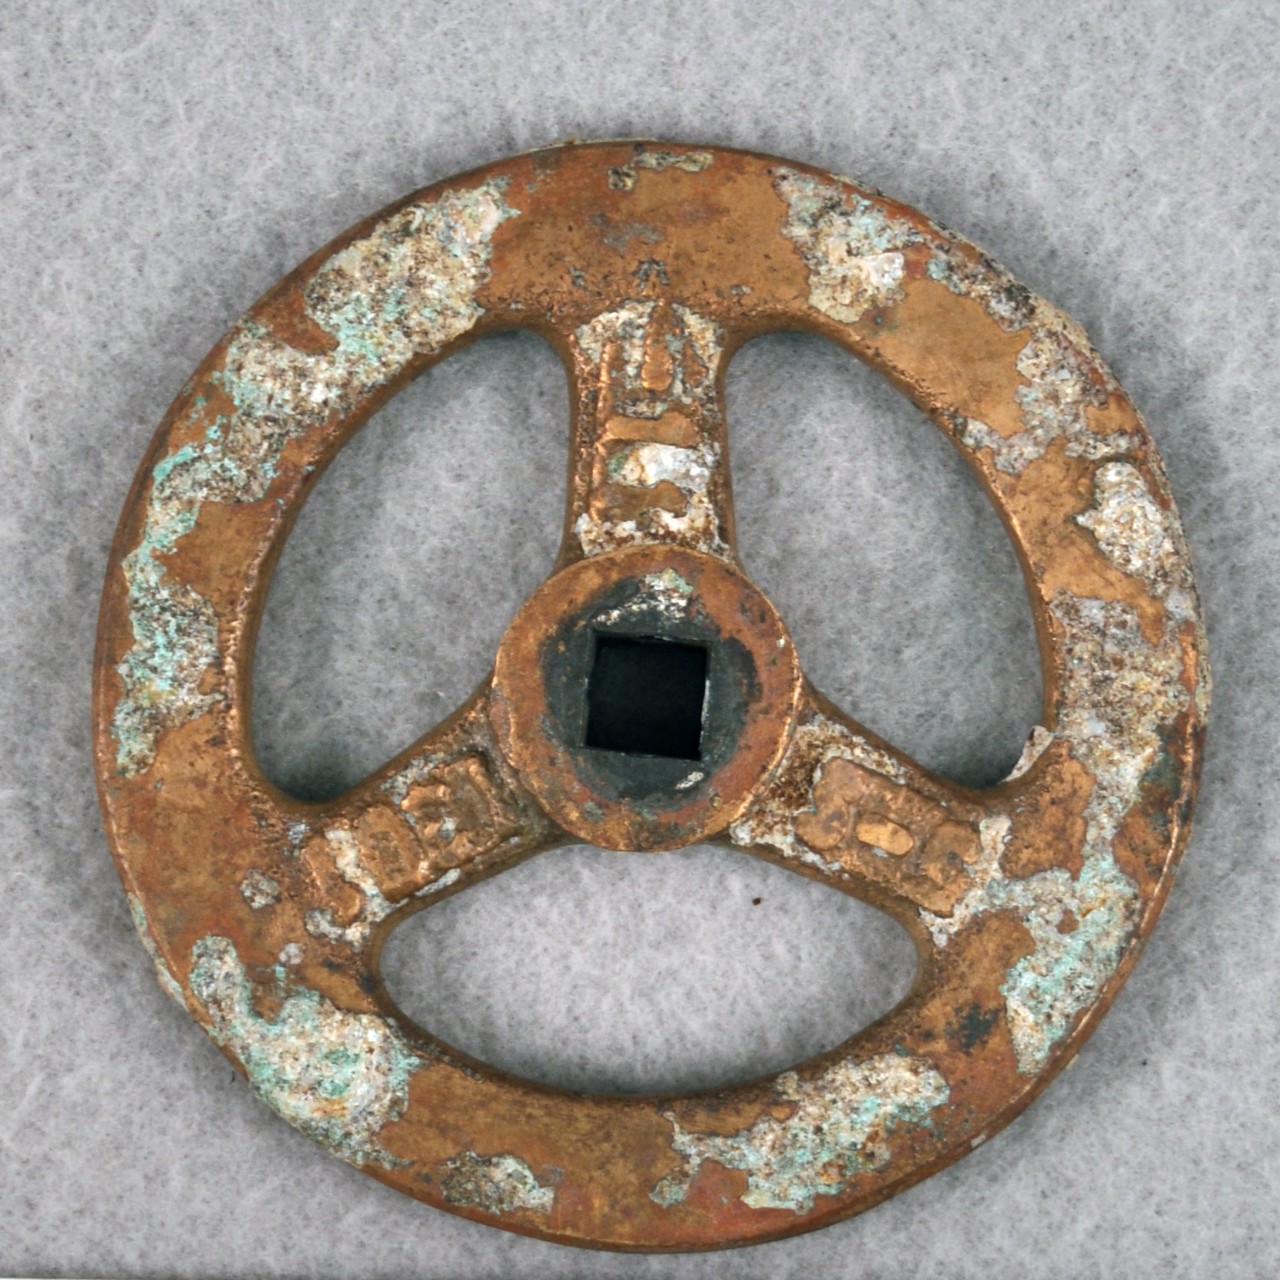 <p>A small brass wheel belonging to a valve. There are three metal spokes on the face, on which there are raised numbers. The numbers are partially obscured by white corrosion; they read “1301”, “…11”, “5-5”.</p>